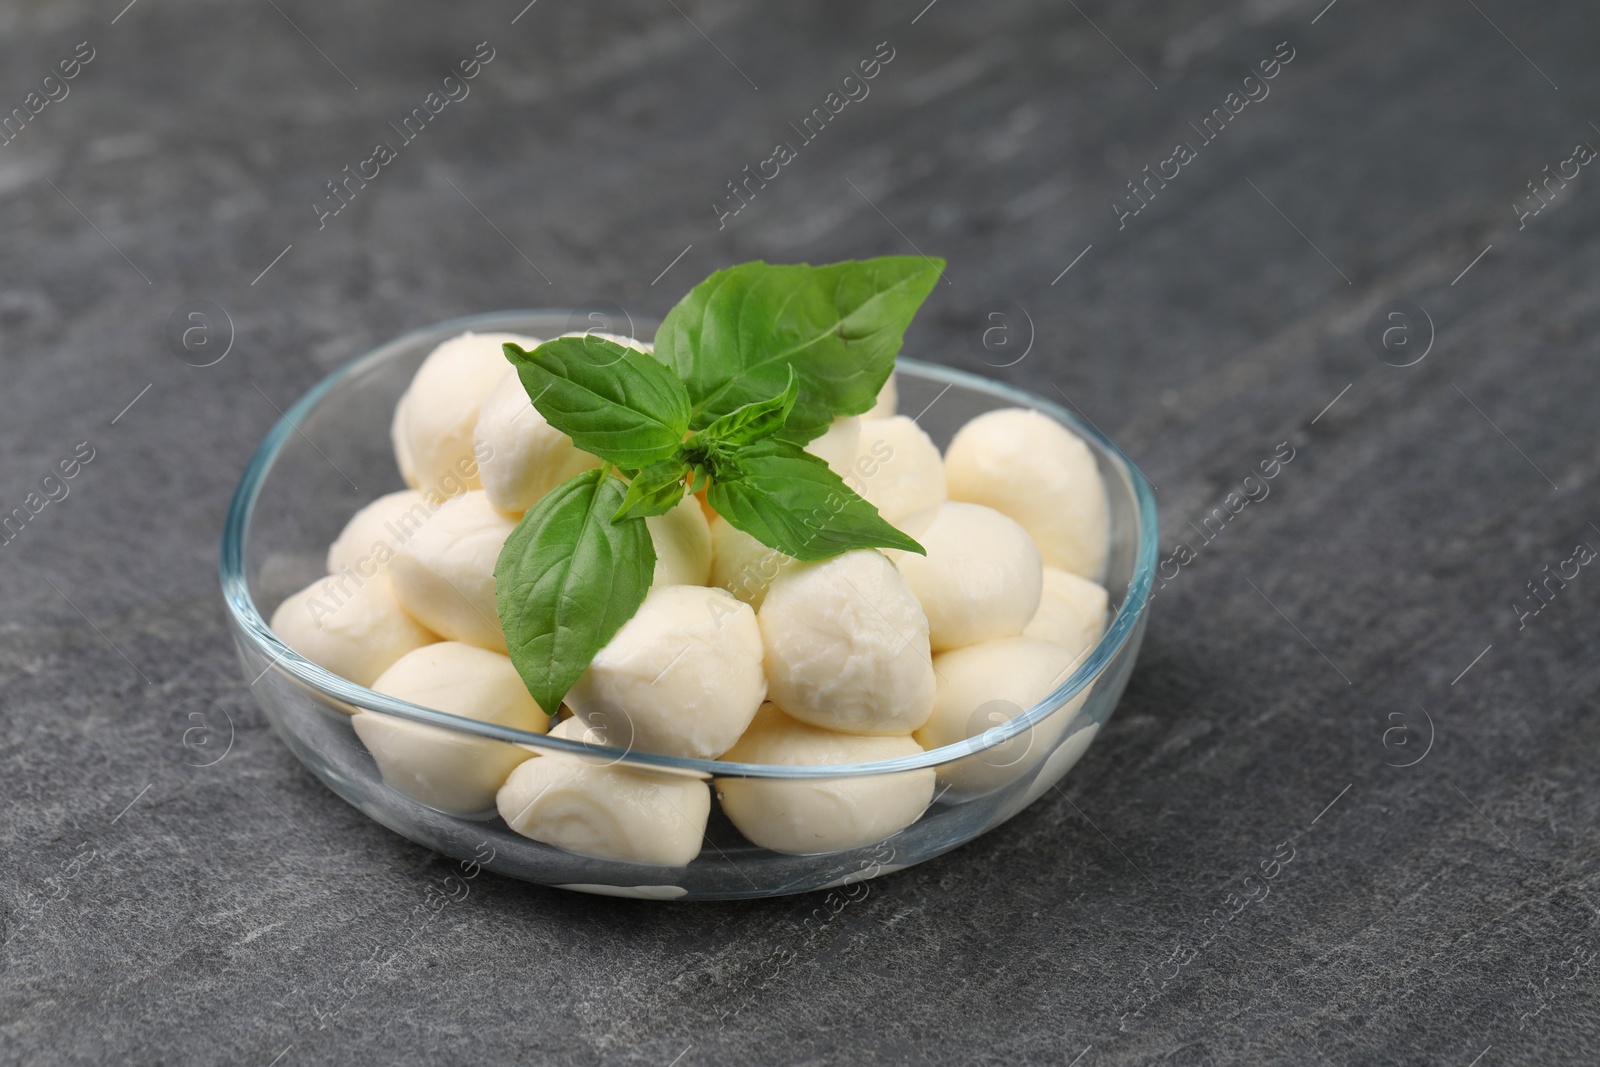 Photo of Tasty mozzarella balls and basil leaves in bowl on grey table